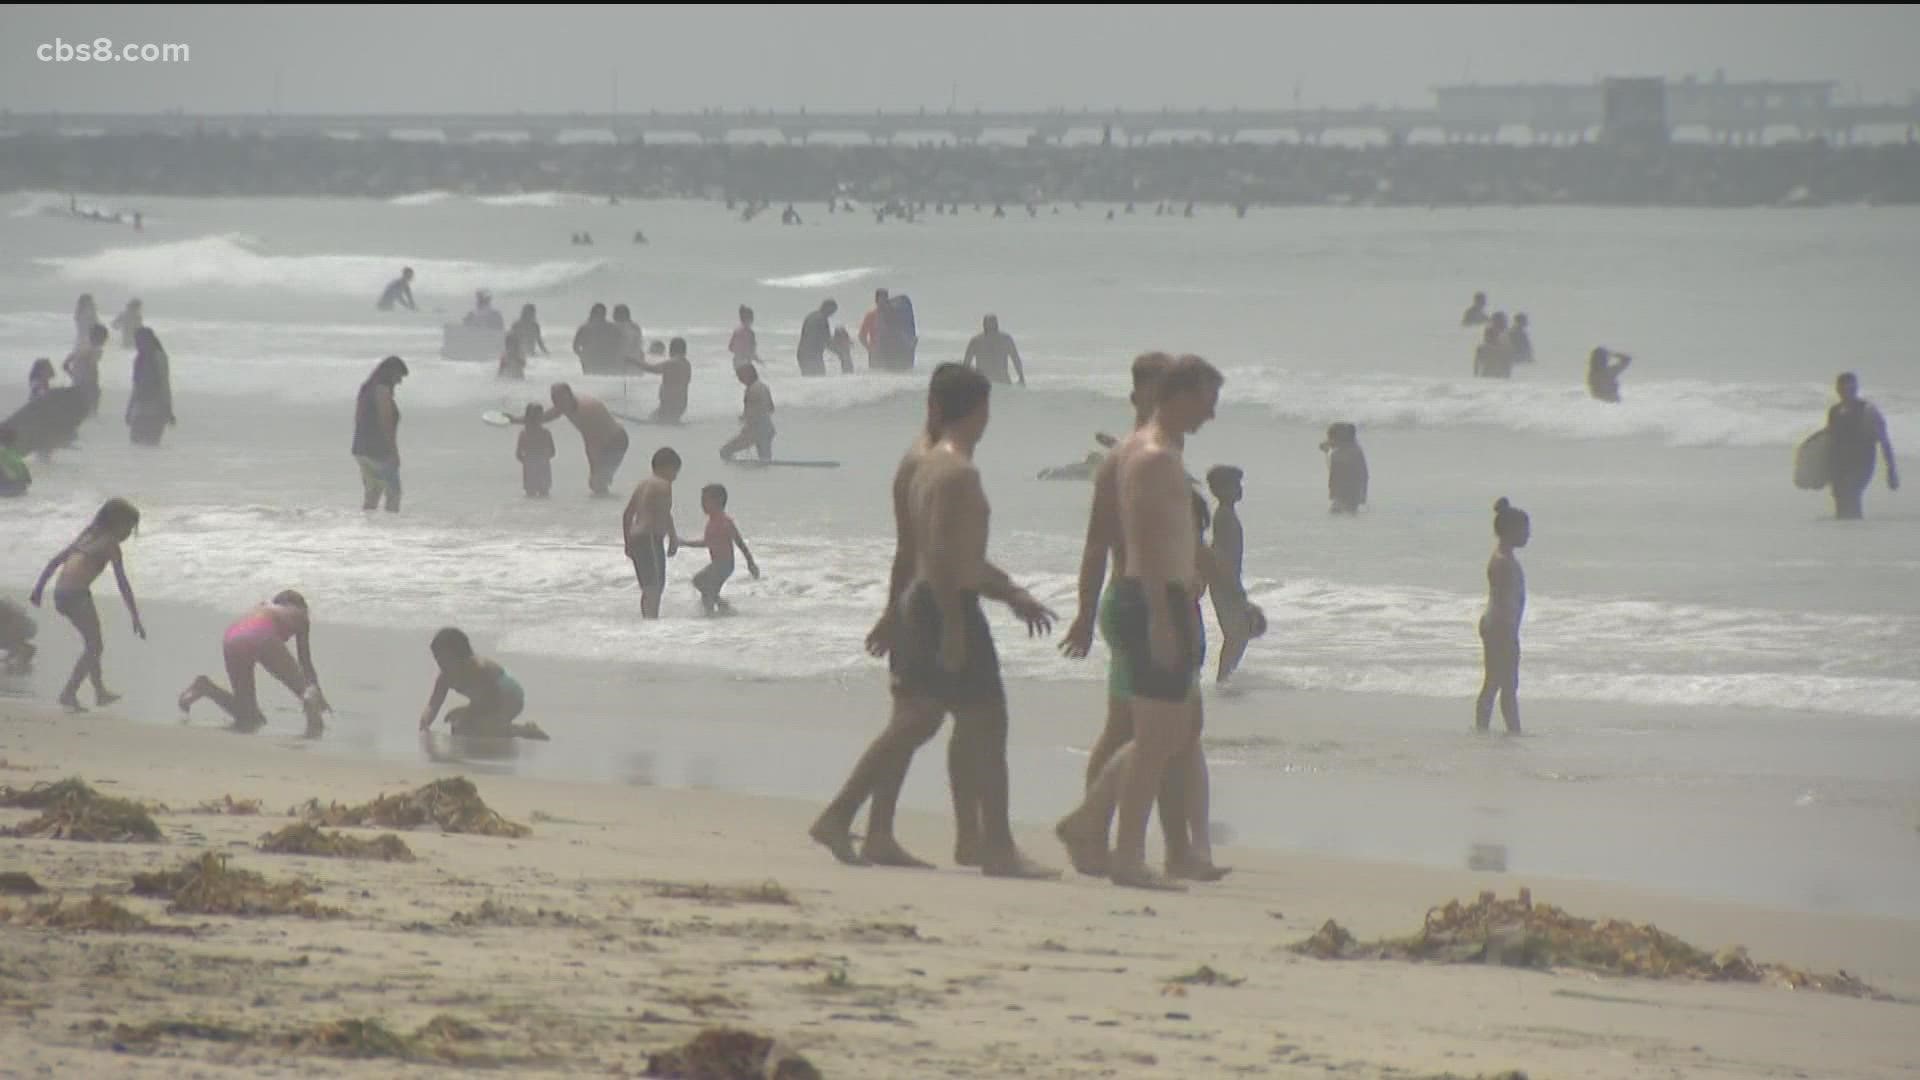 San Diego lifeguards and the National Weather Service were warning beachgoers of elevated surf and sting rays.